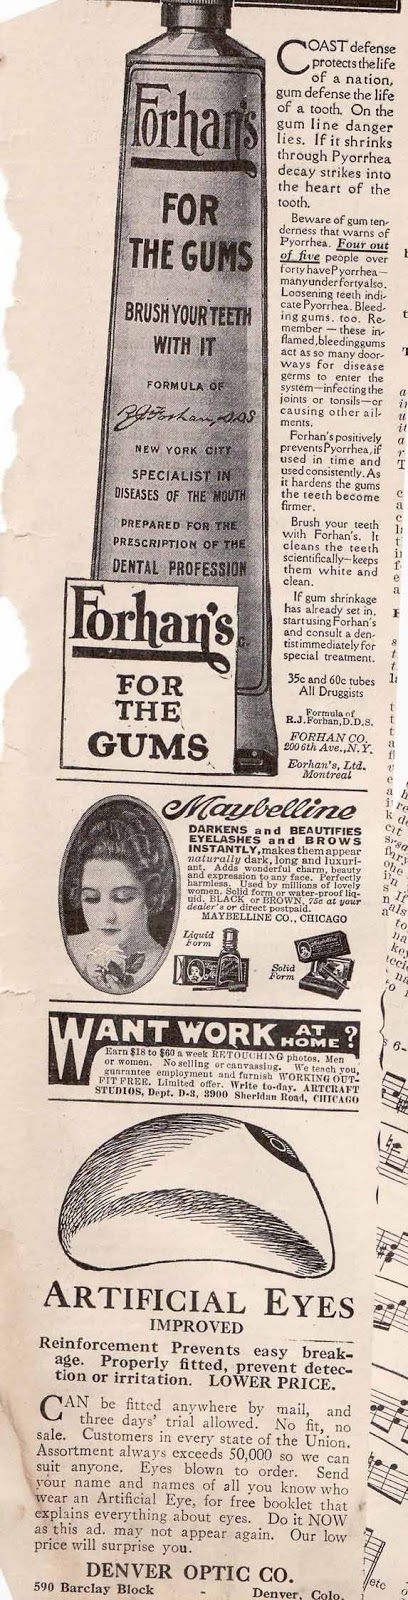 Forhans toothpaste and artificial eyes 1926